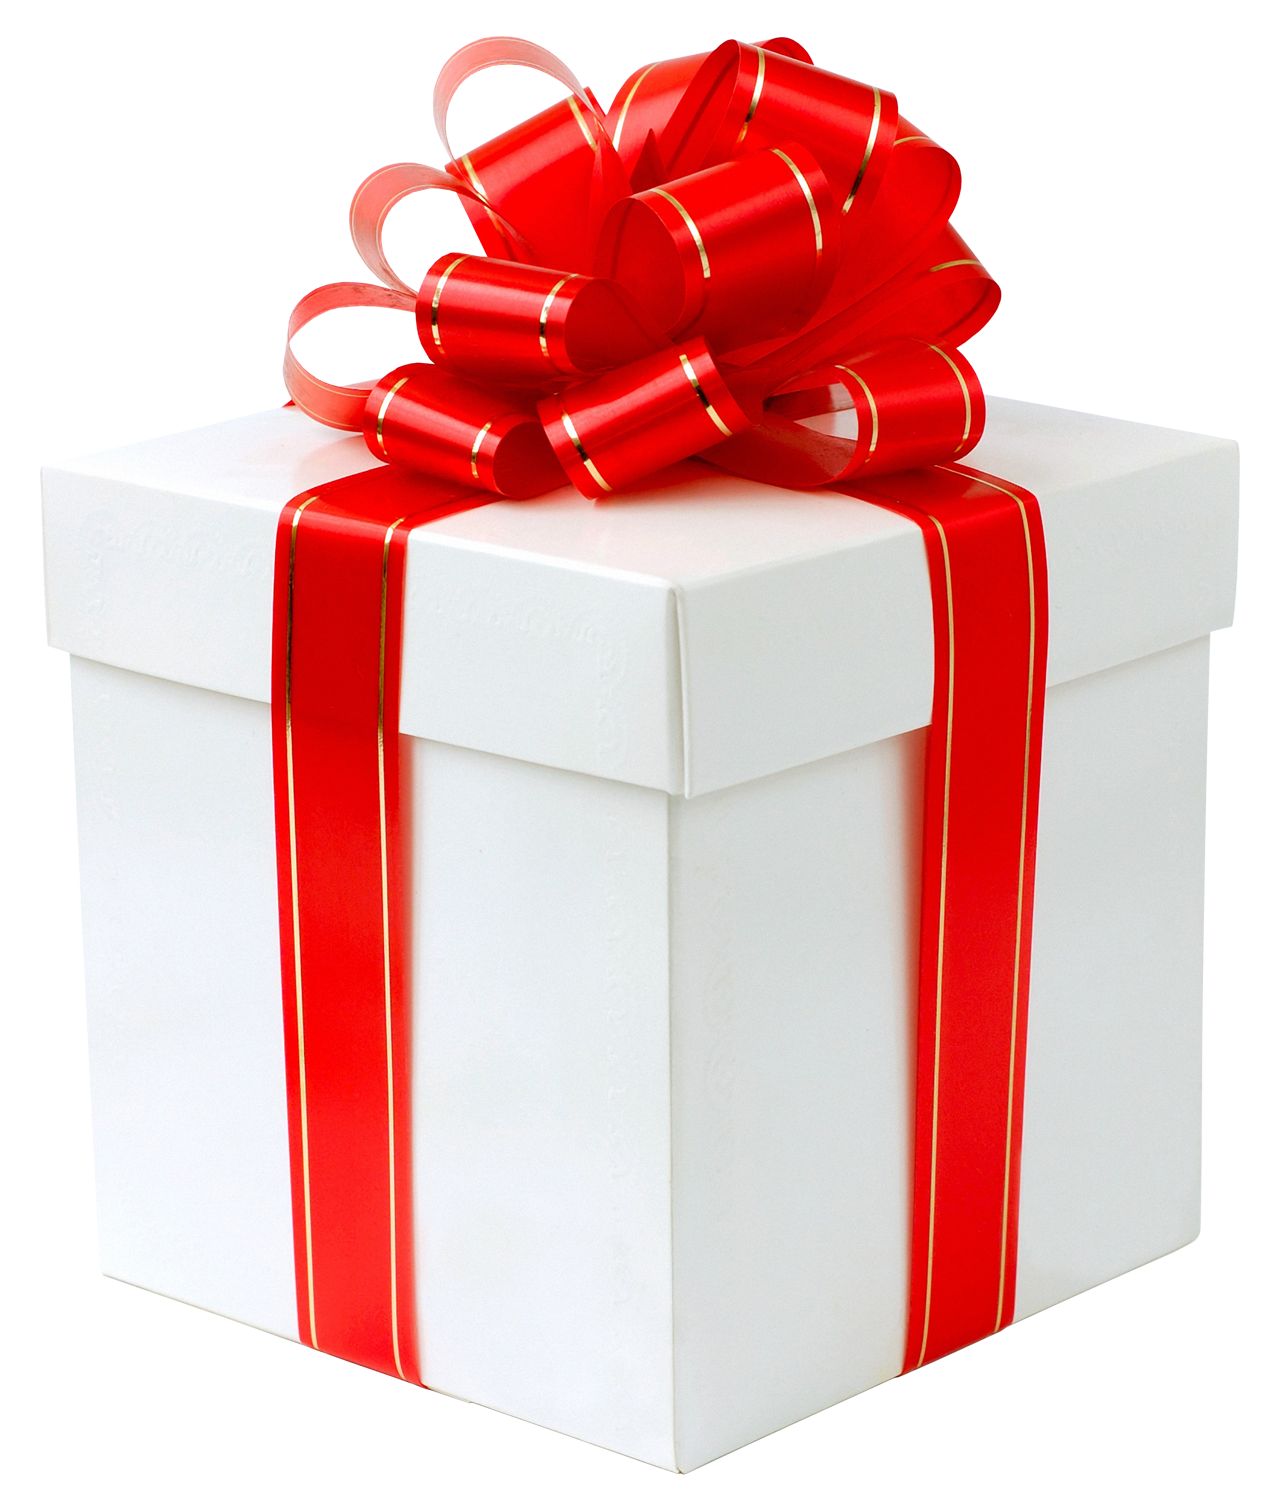 gift clipart file